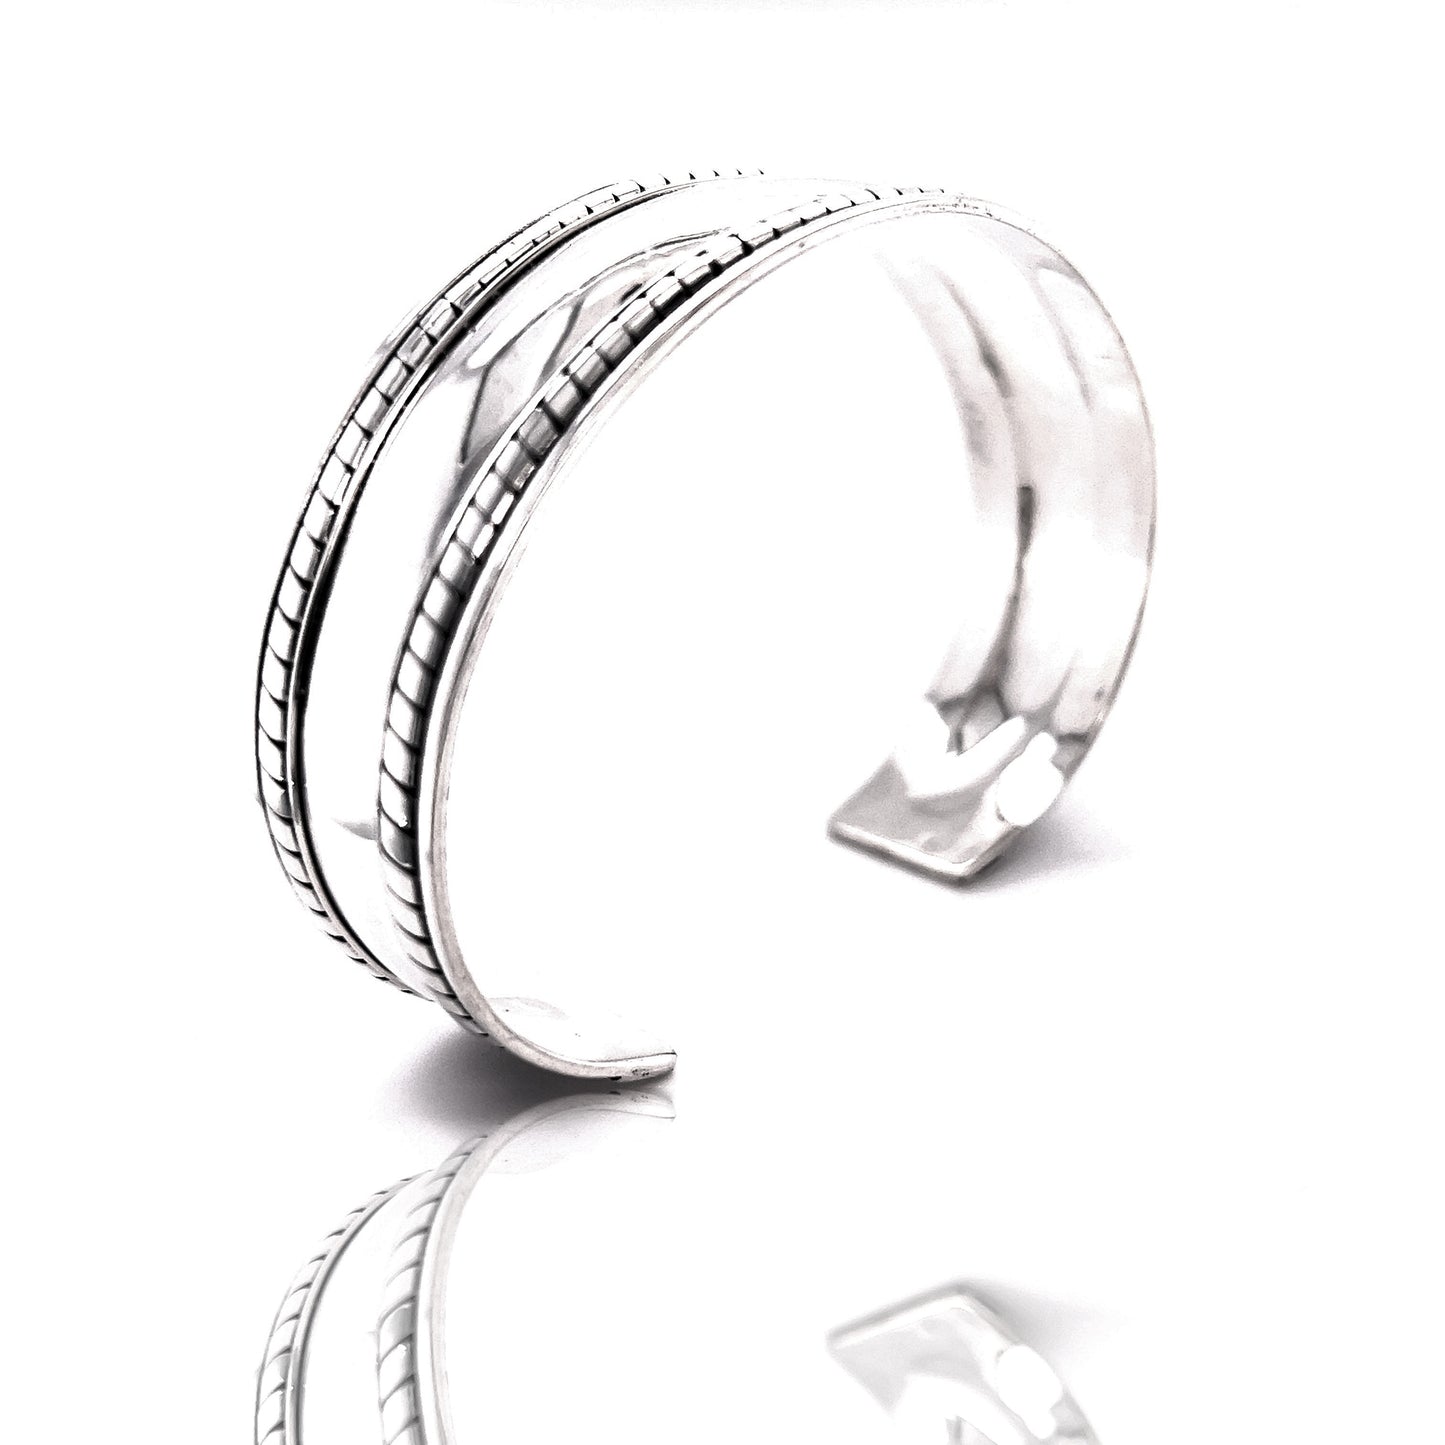 A Super Silver domed silver cuff bracelet with rope etching on a white surface.